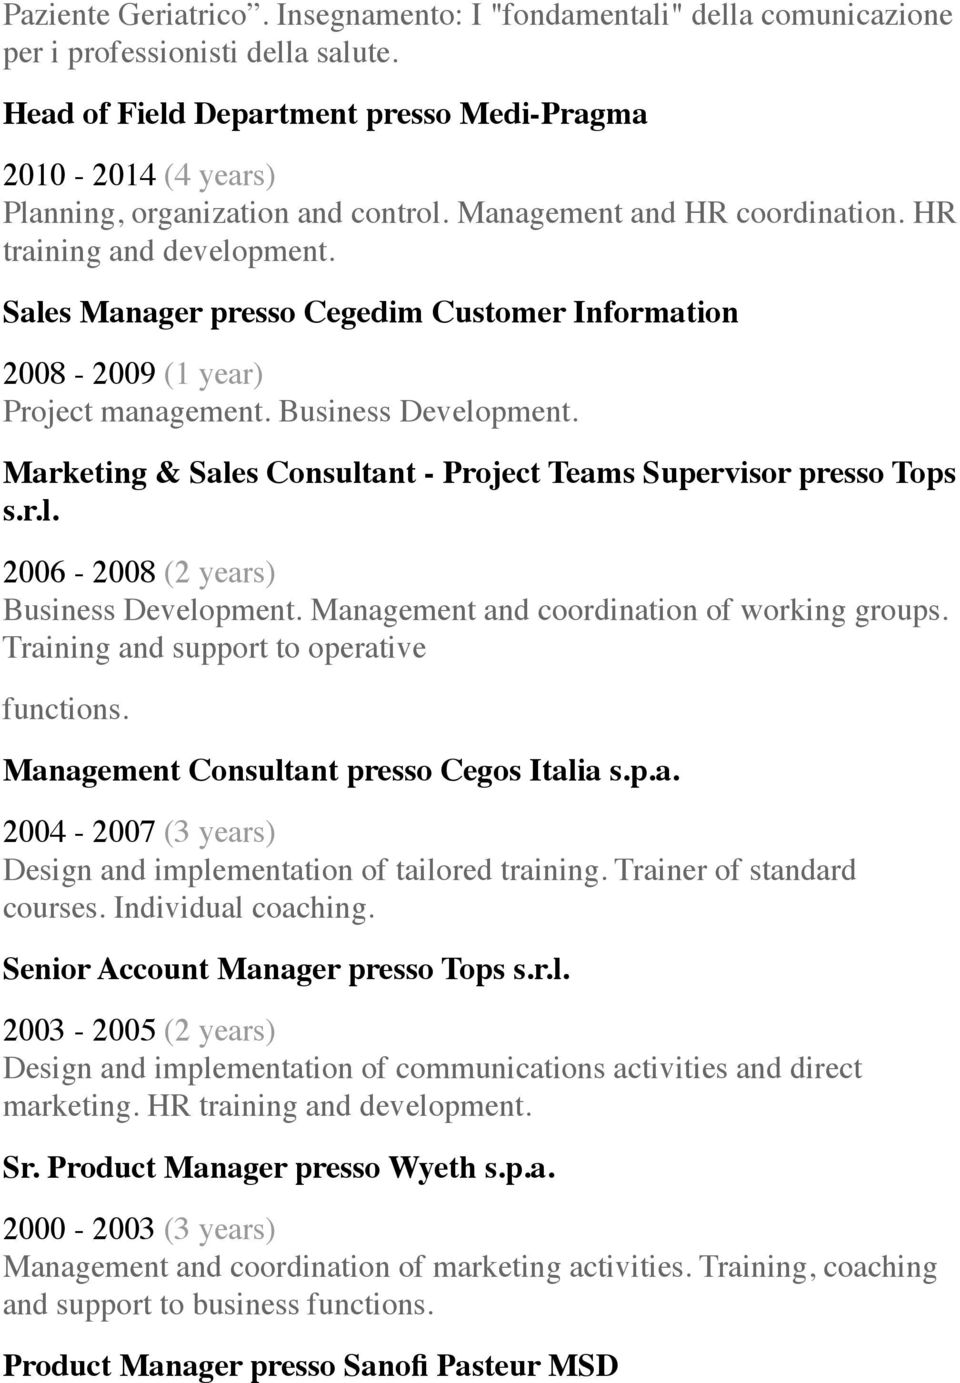 Sales Manager presso Cegedim Customer Information 2008-2009 (1 year) Project management. Business Development. Marketing & Sales Consultant - Project Teams Supervisor presso Tops s.r.l. 2006-2008 (2 years) Business Development.